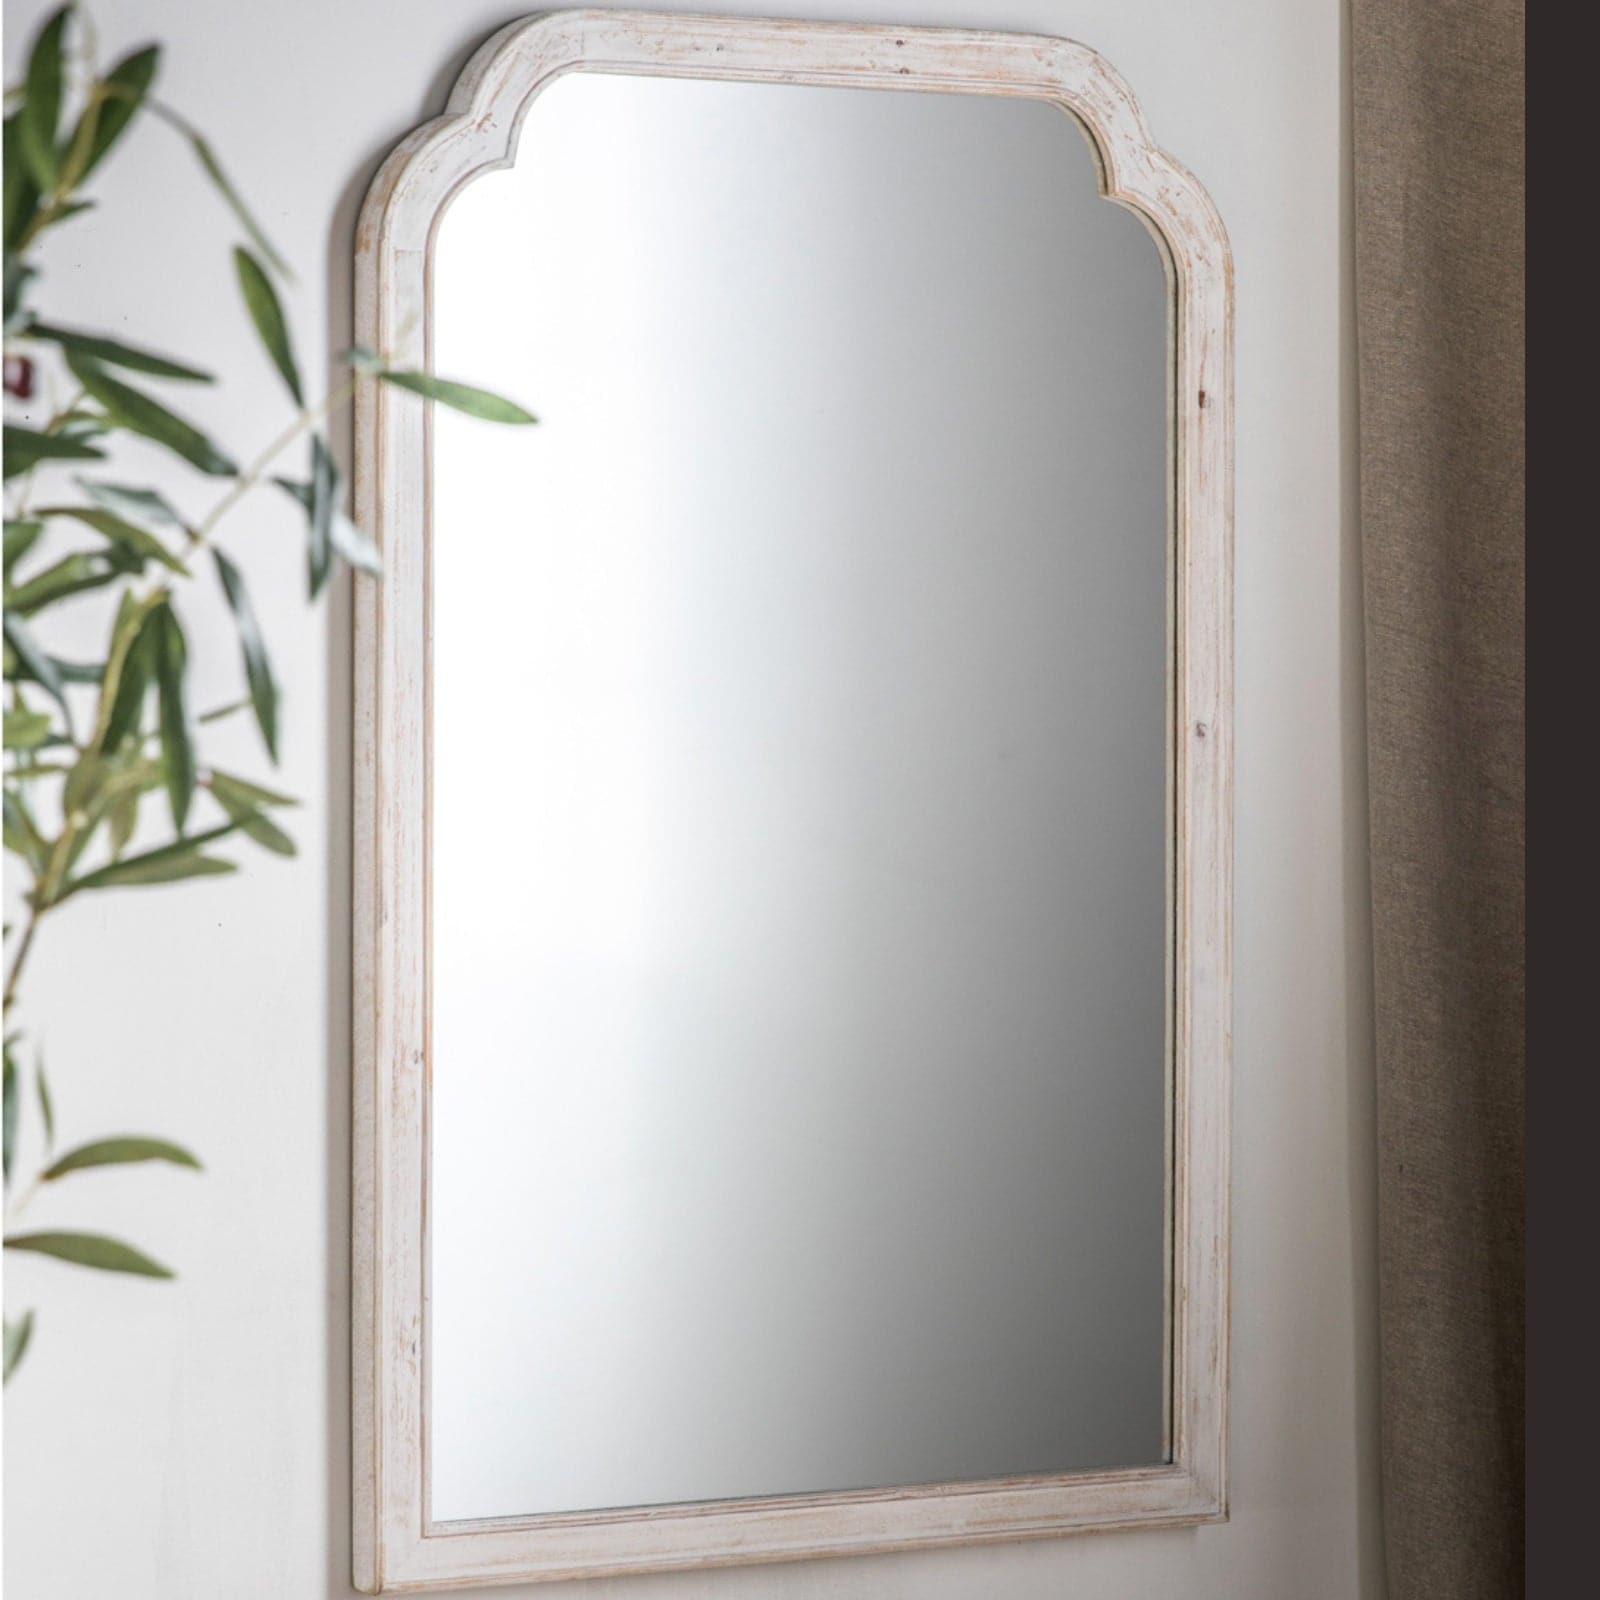 Distressed White Wooden Hatty Mirror - The Farthing